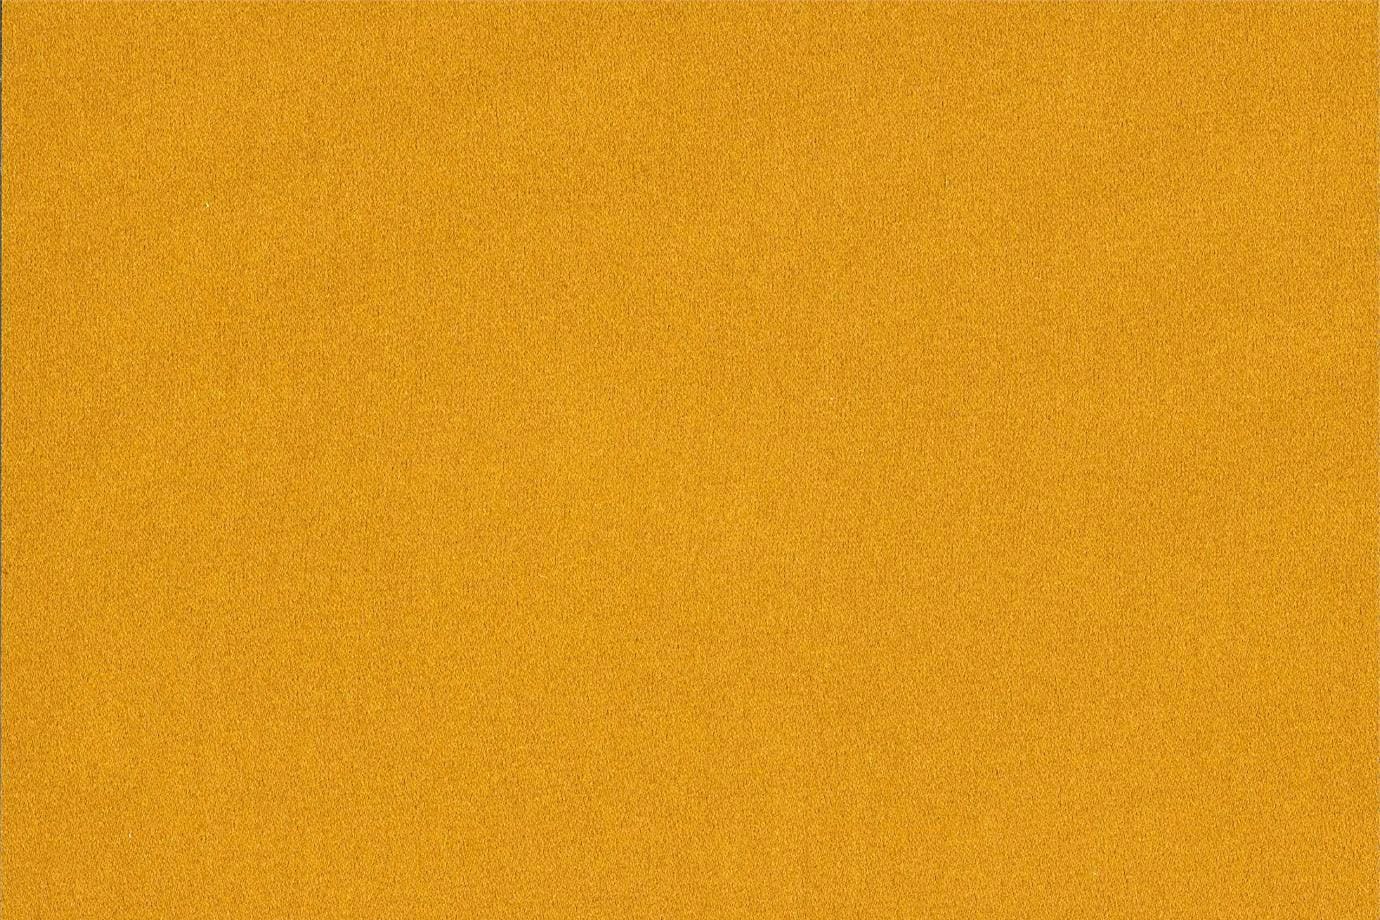 J1594 MEO PATACCA 011 Oro home decoration fabric